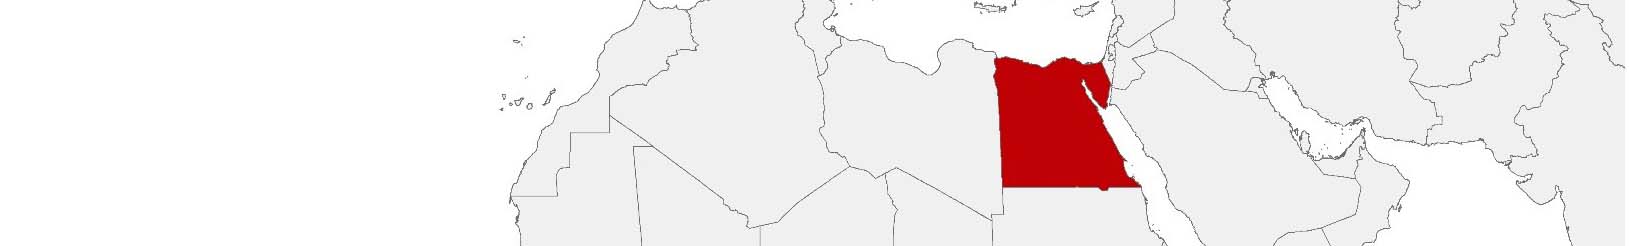 Purchasing power data and socio-demographic data can be displayed on a map of Egypt using the following area boundaries: Aqsam Marakiz  and Muḥāfaẓāt.